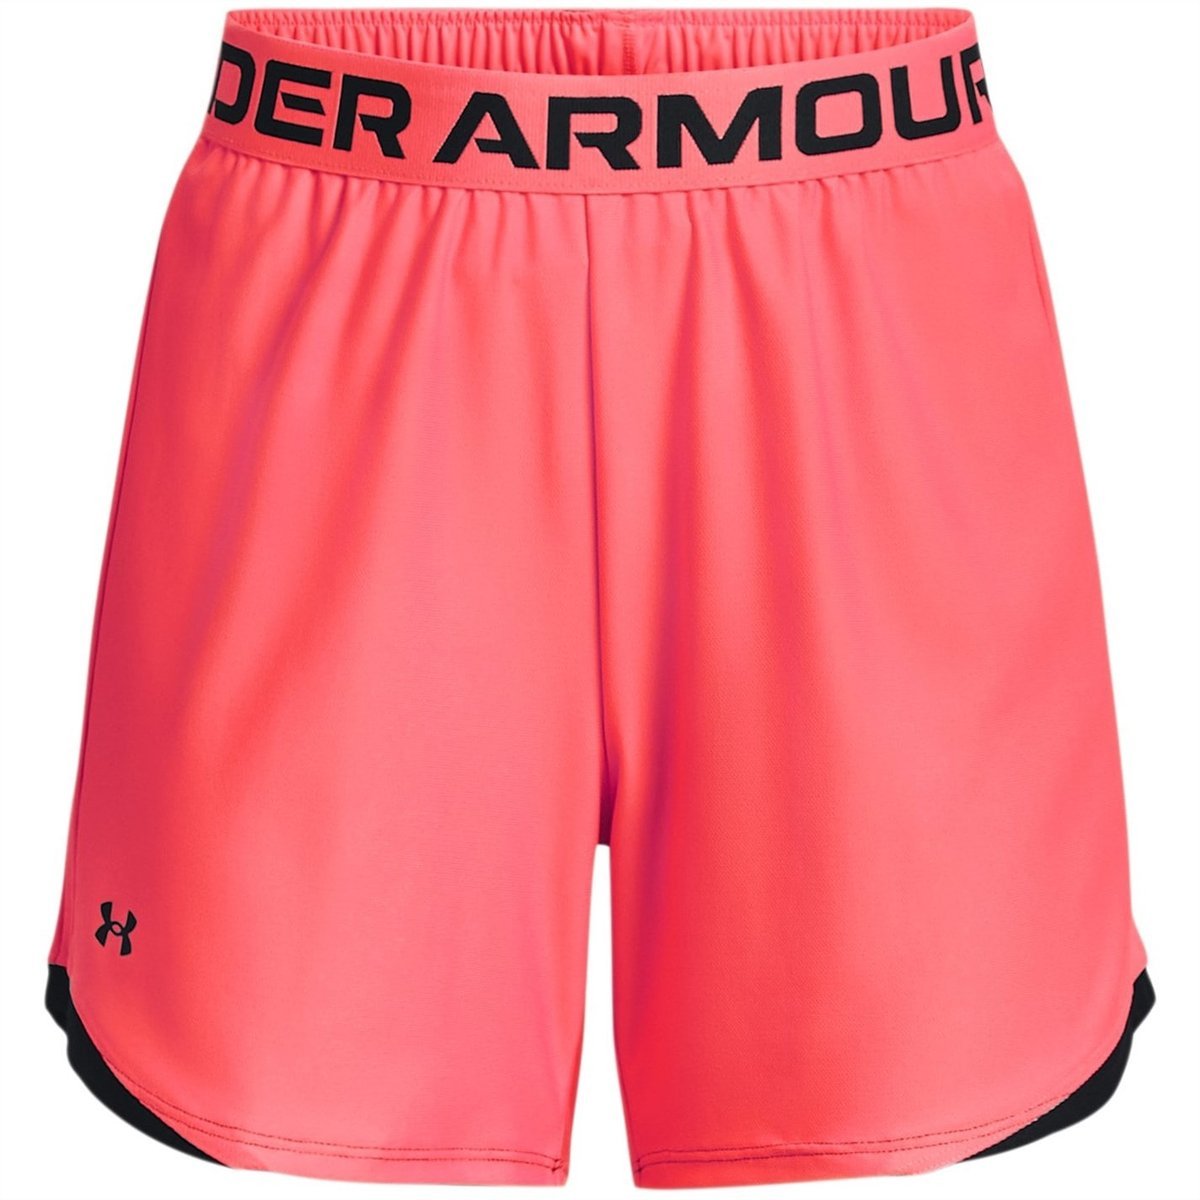 Under Armour Women's Play Up 2.0 Pink Shorts- Size Medium